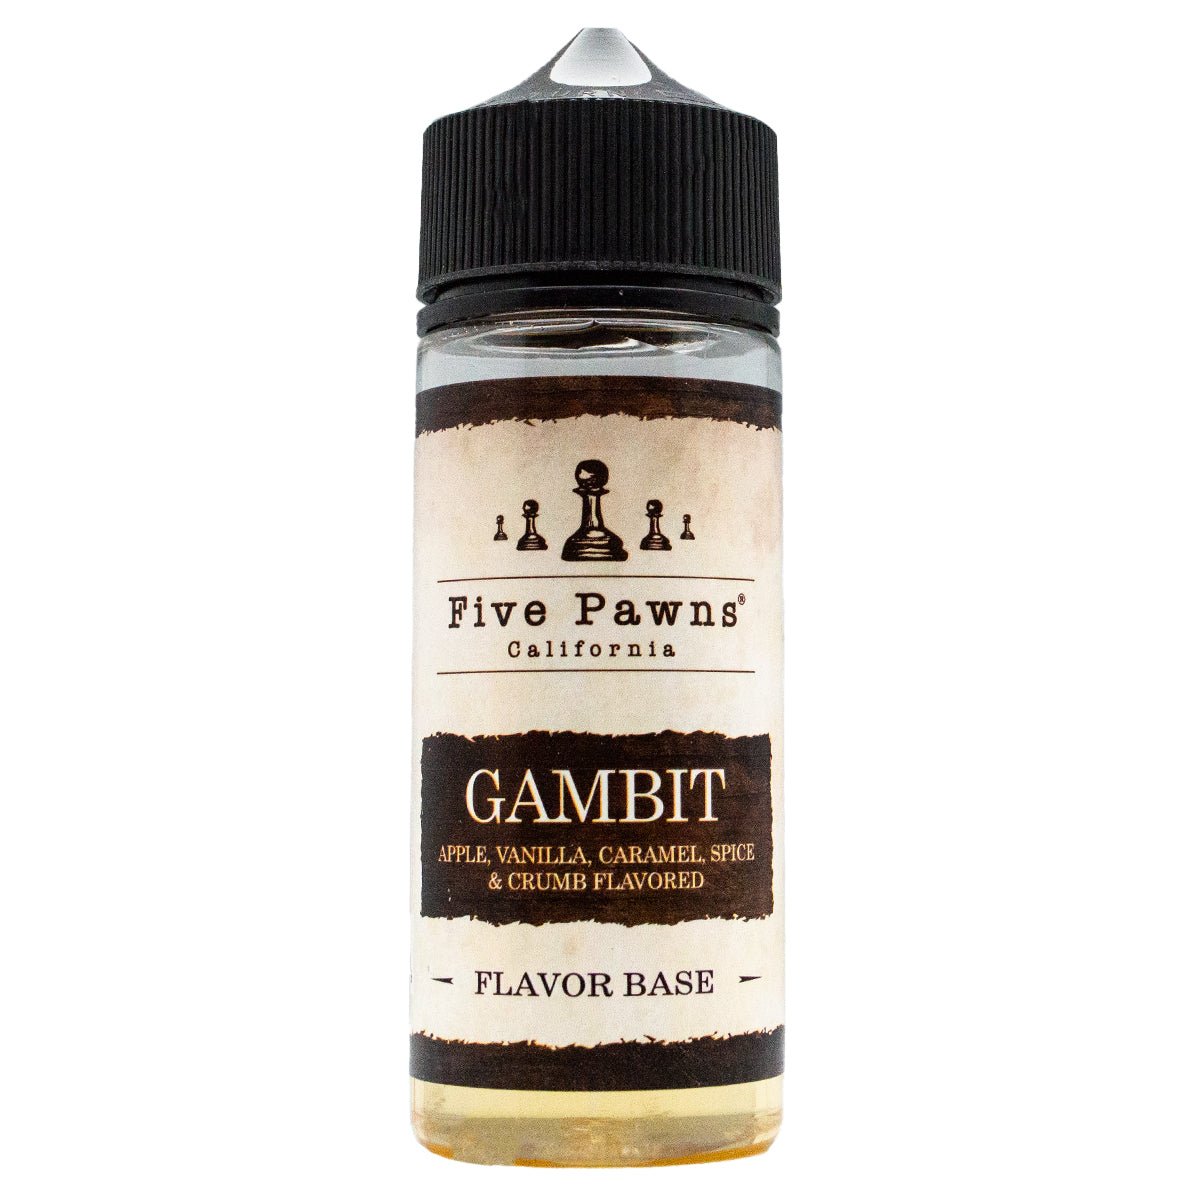 Gambit 100ml Shortfill By Five Pawns Five Pawns